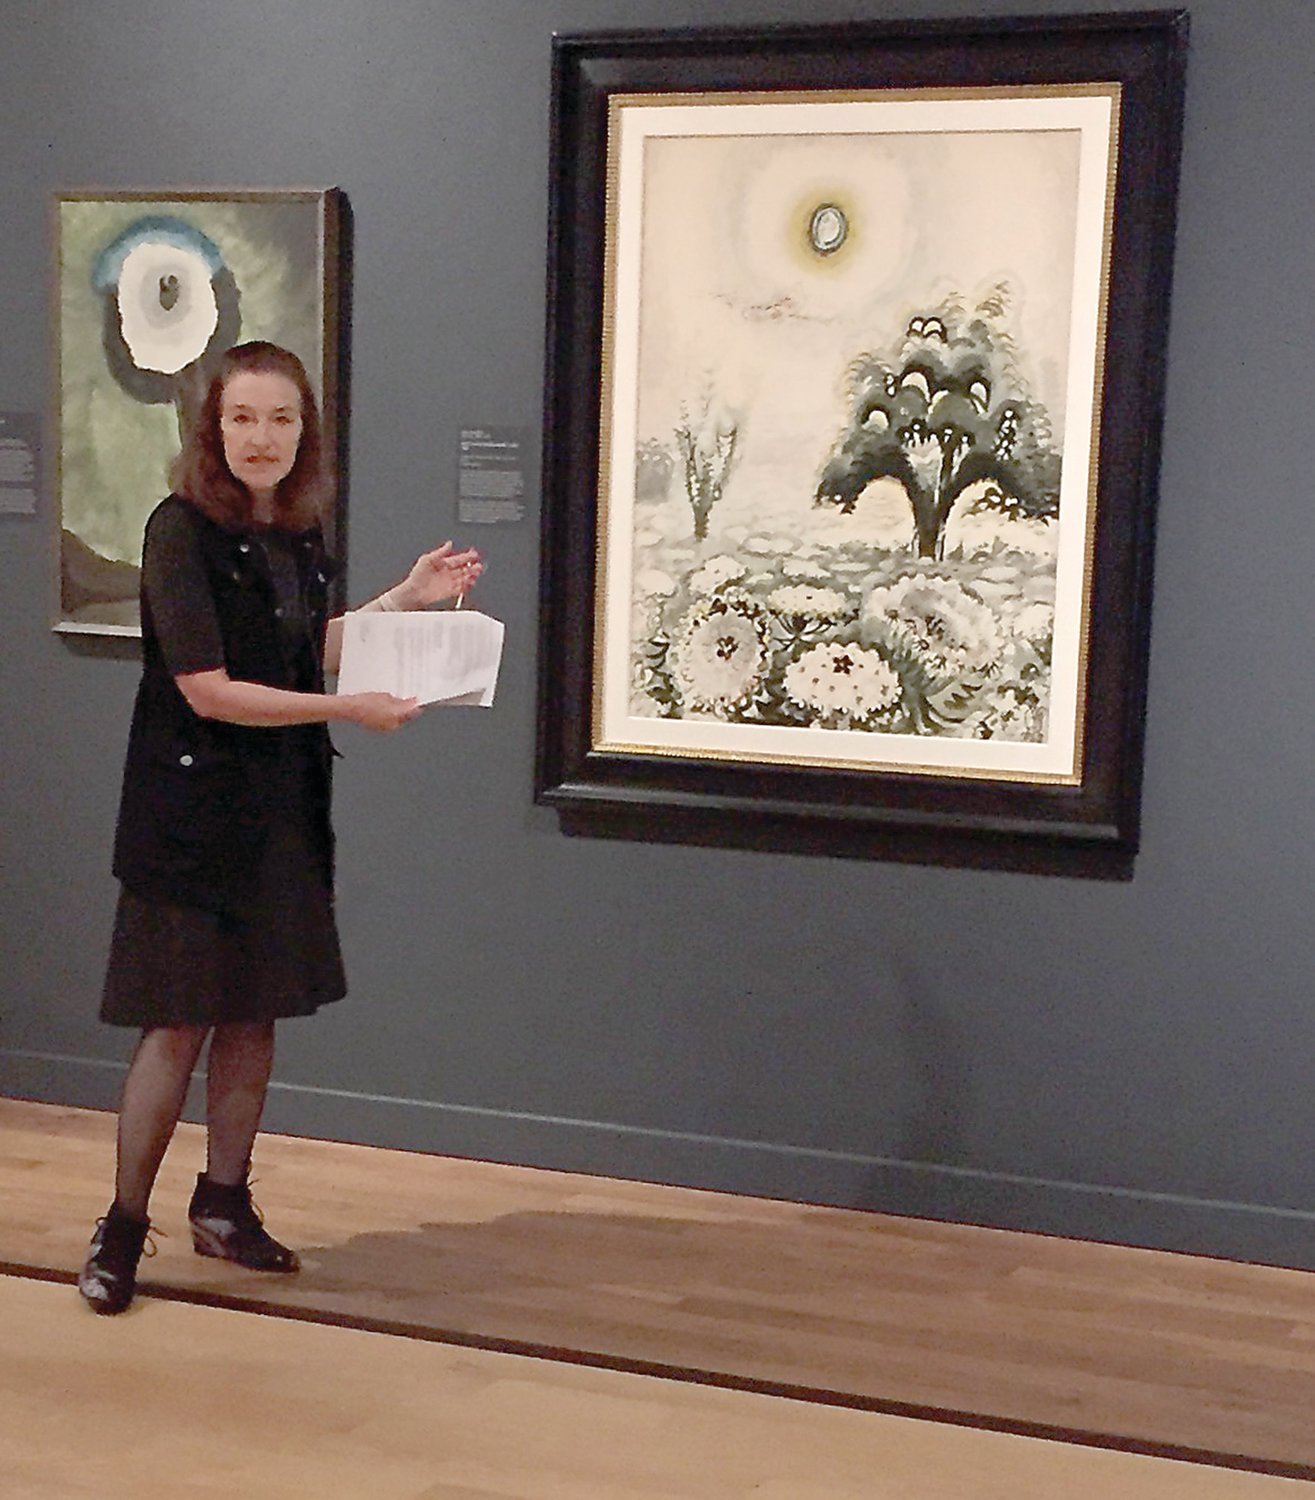 Laura Vookies of the Hudson River Museum, a co-curator of “The Color of the Moon” exhibit at the Michener Art Museum, discusses Charles Burchfield’s “Moon and Queen Anne’s Lace,” watercolor and gouache on paper.